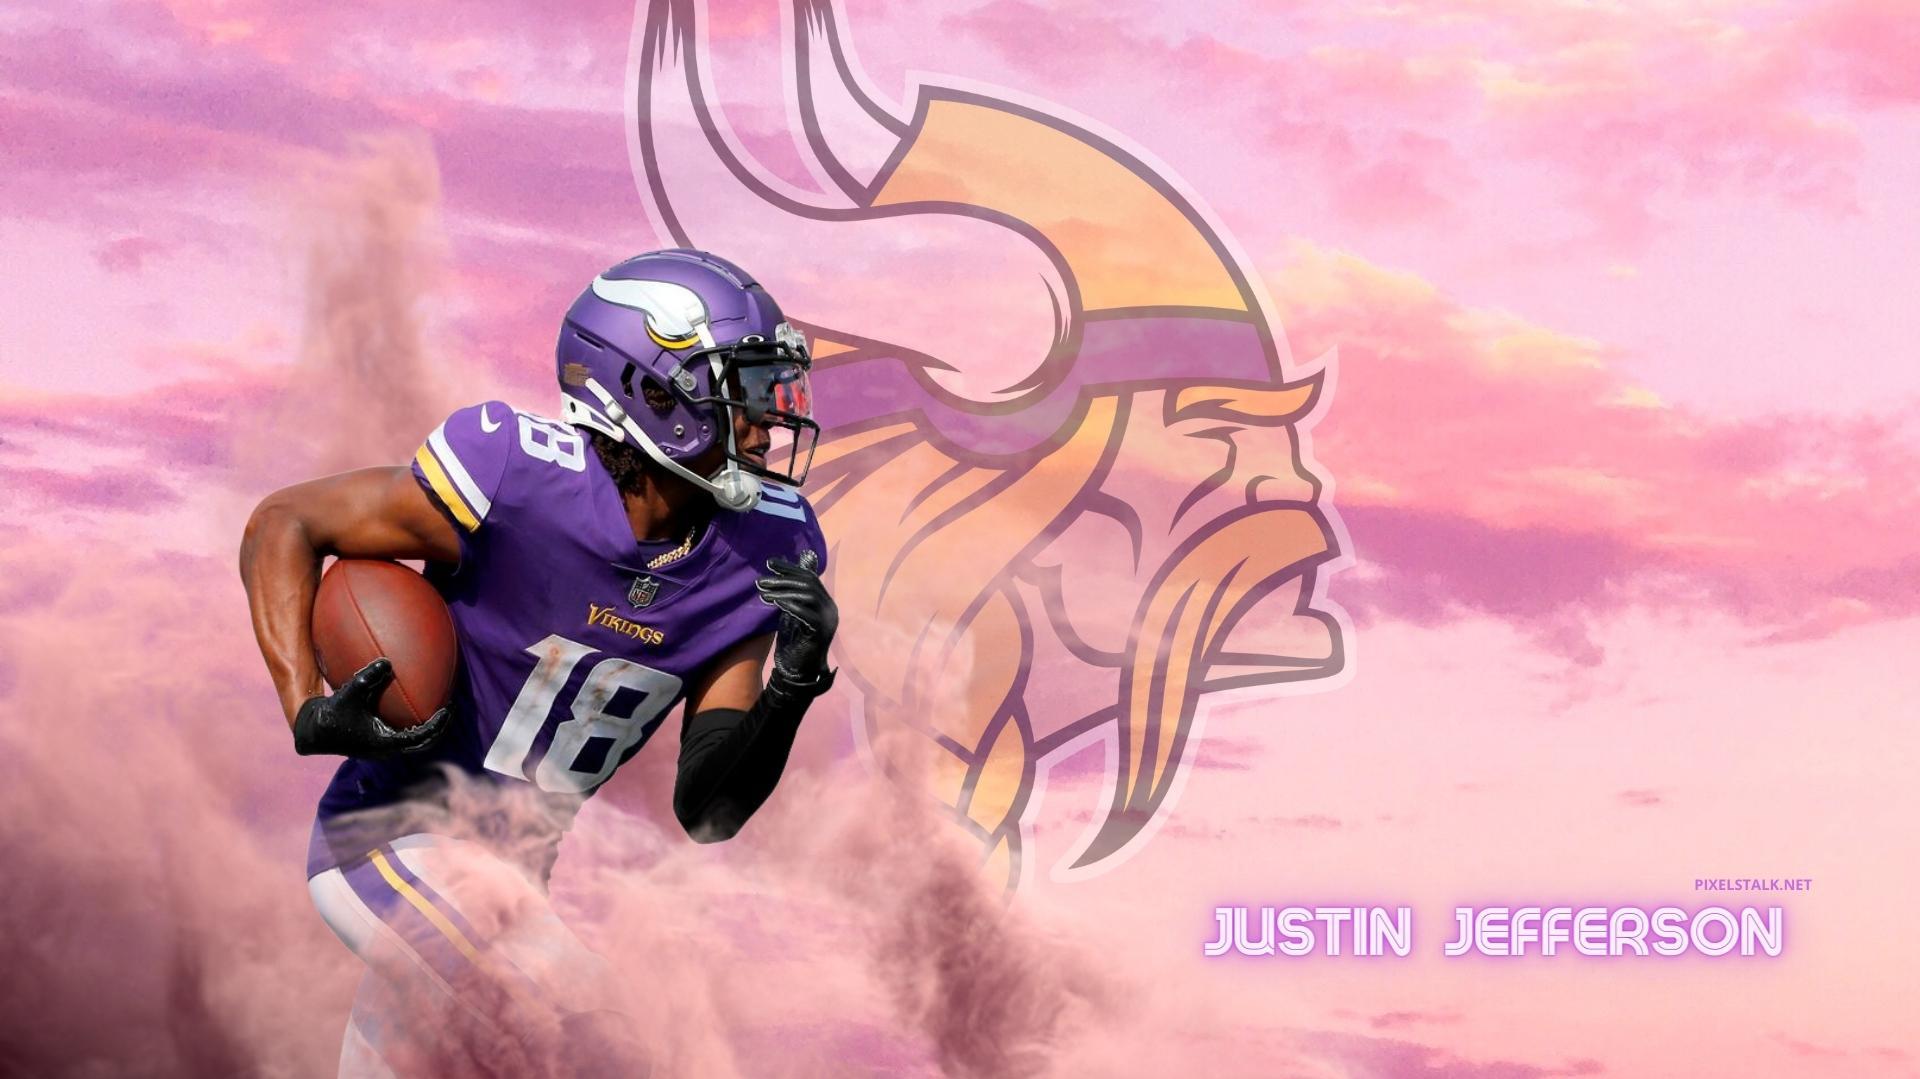 Justin Jefferson Wallpaper Discover more Background griddy Iphone nfl  vikings wallpaper wallpapers httpswwwenjpgco in 2023  Nfl photos  Viking wallpaper Justin